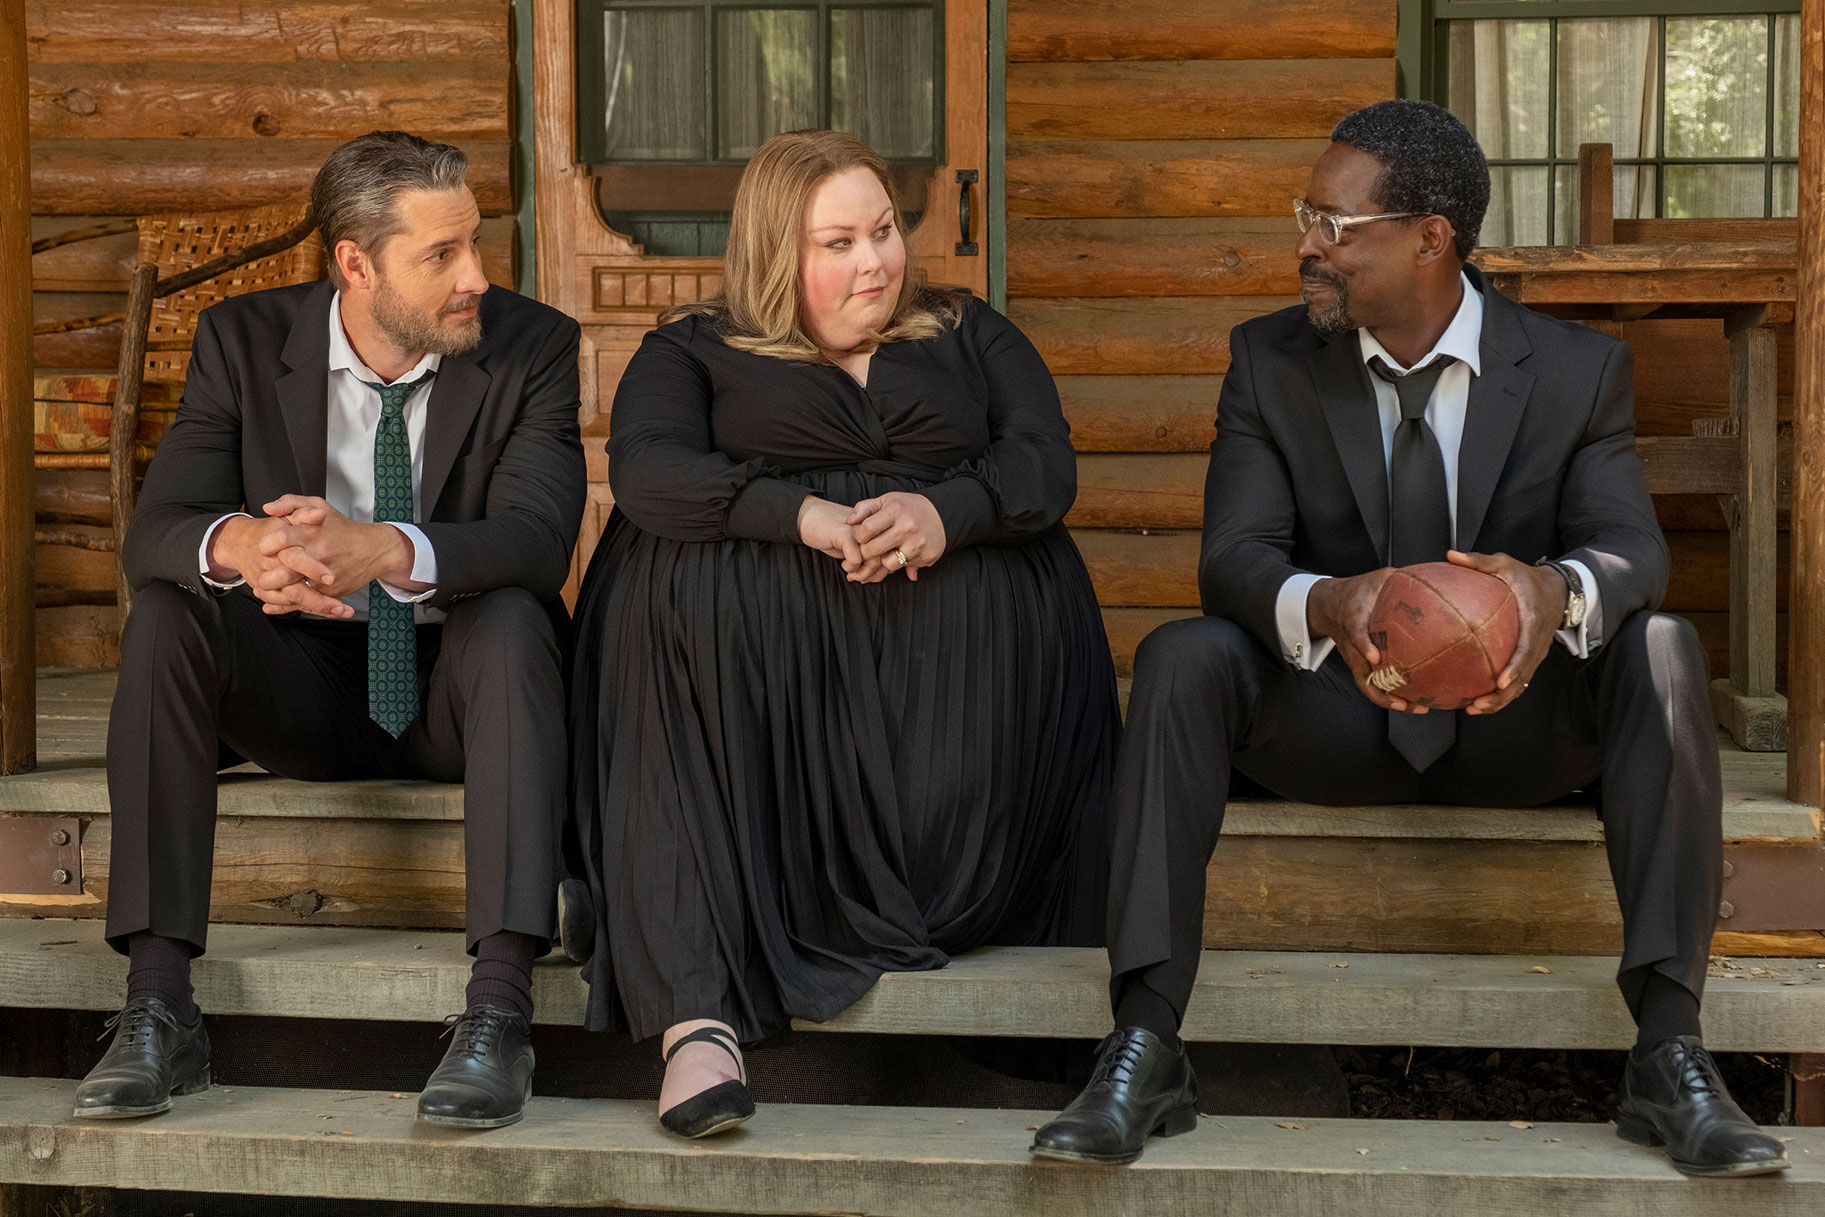 Justin Hartley, Chrissy Metz, and Sterling K. Brown sitting together on a porch